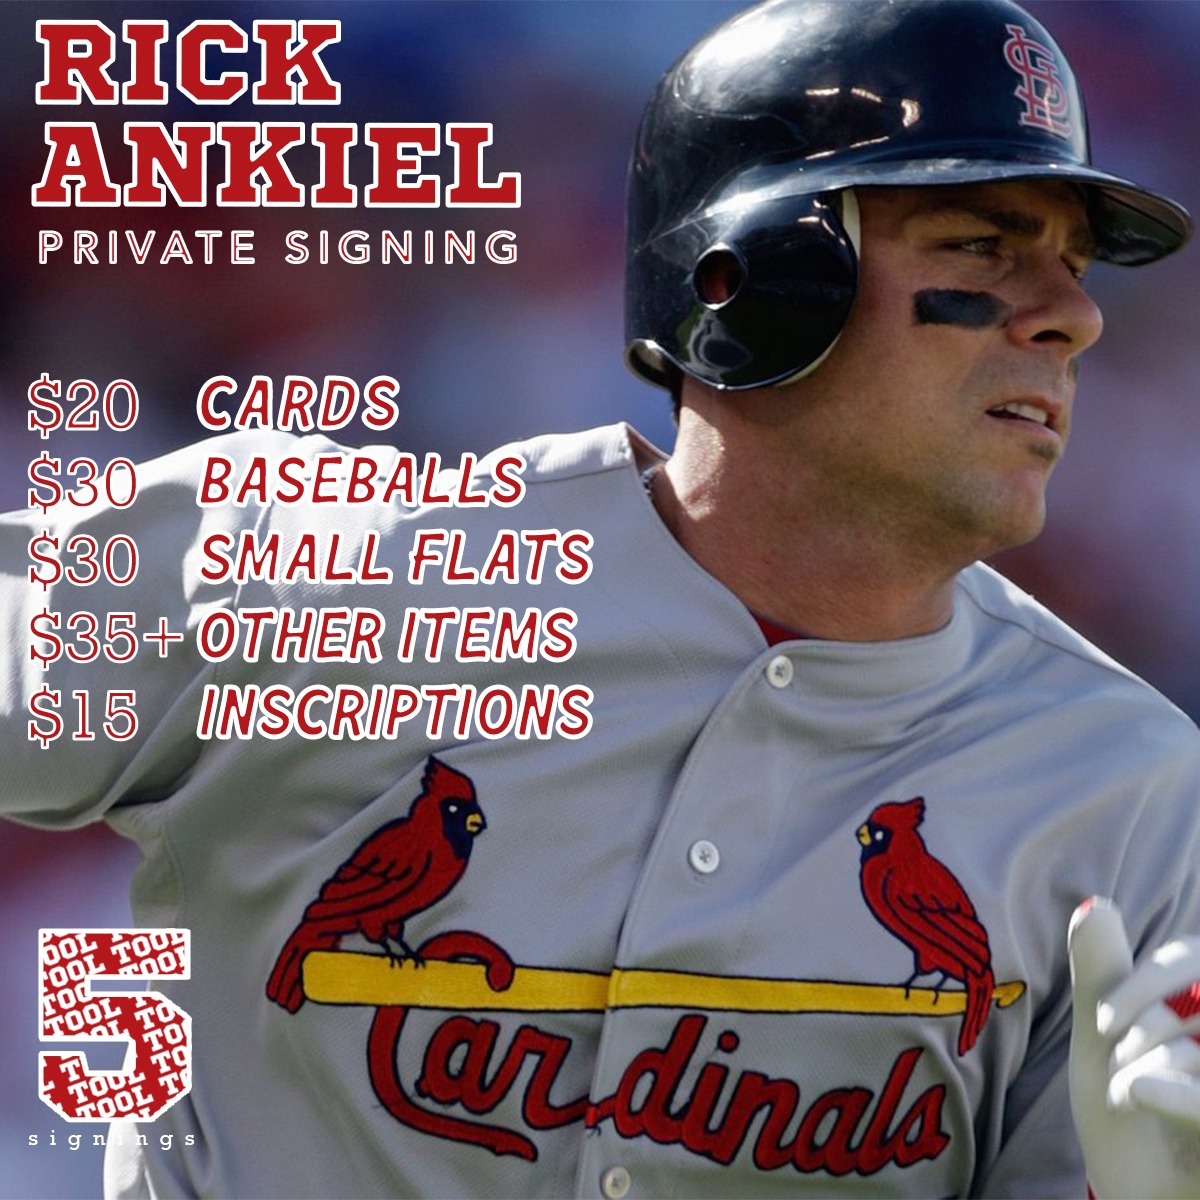 Reminder: The deadline for our signing with Rick Ankiel is 5/5/23! Baseballs are available for purchase via our website. Link for purchase: fivetoolsignings.com/products/rick-… #Fivetoolsignings #Whodoyoucollect #Alwaysroyal #Forthea #Natitude #Togetherroyal